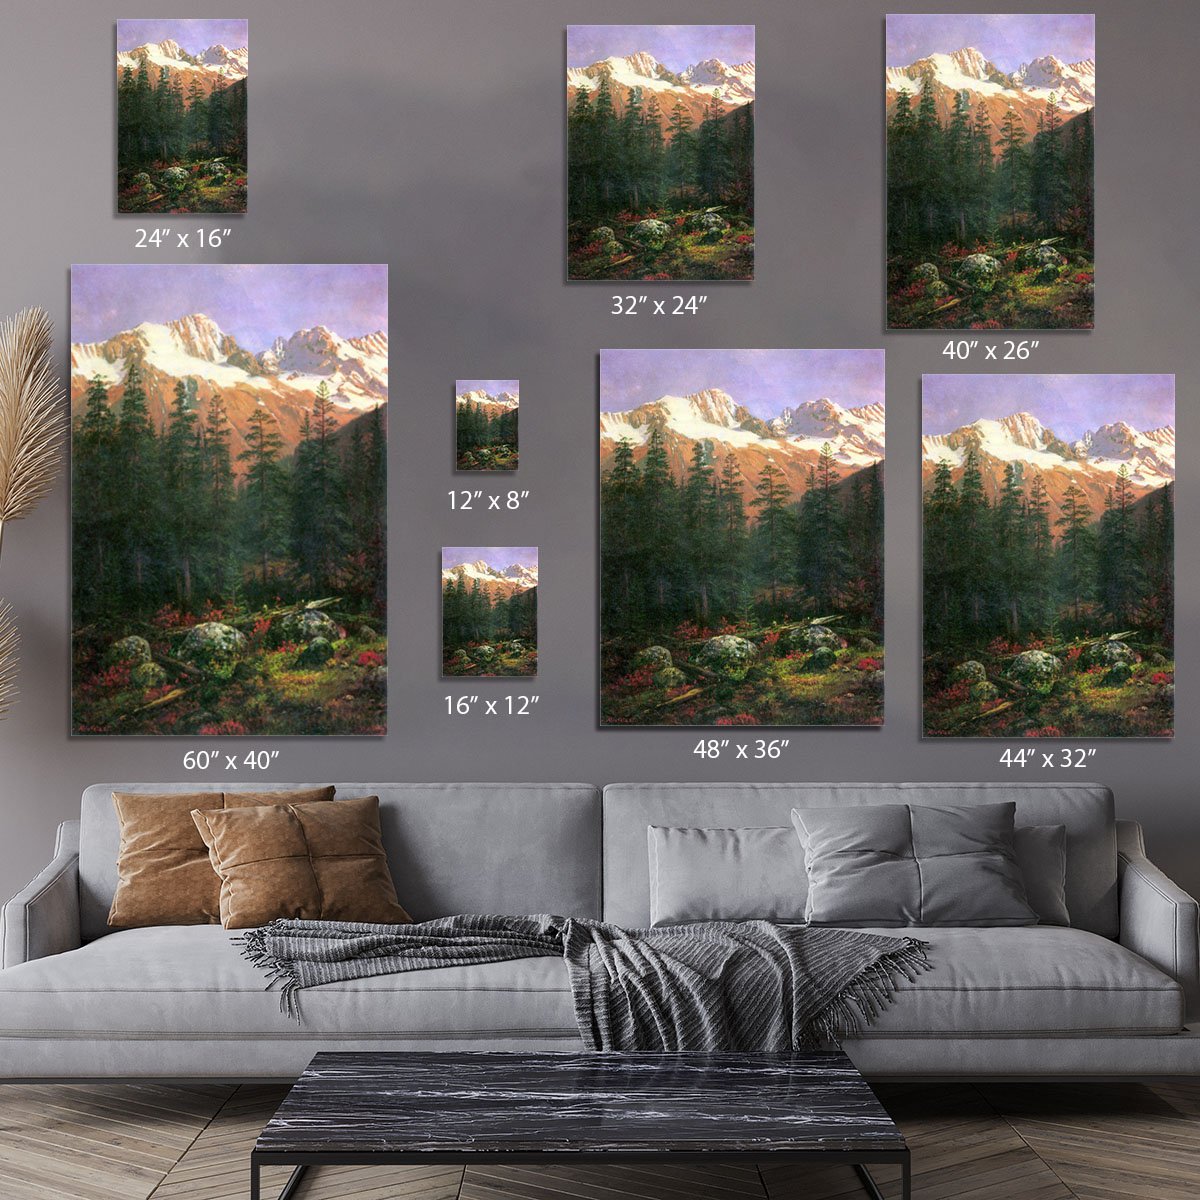 Canadian Rockies by Bierstadt Canvas Print or Poster